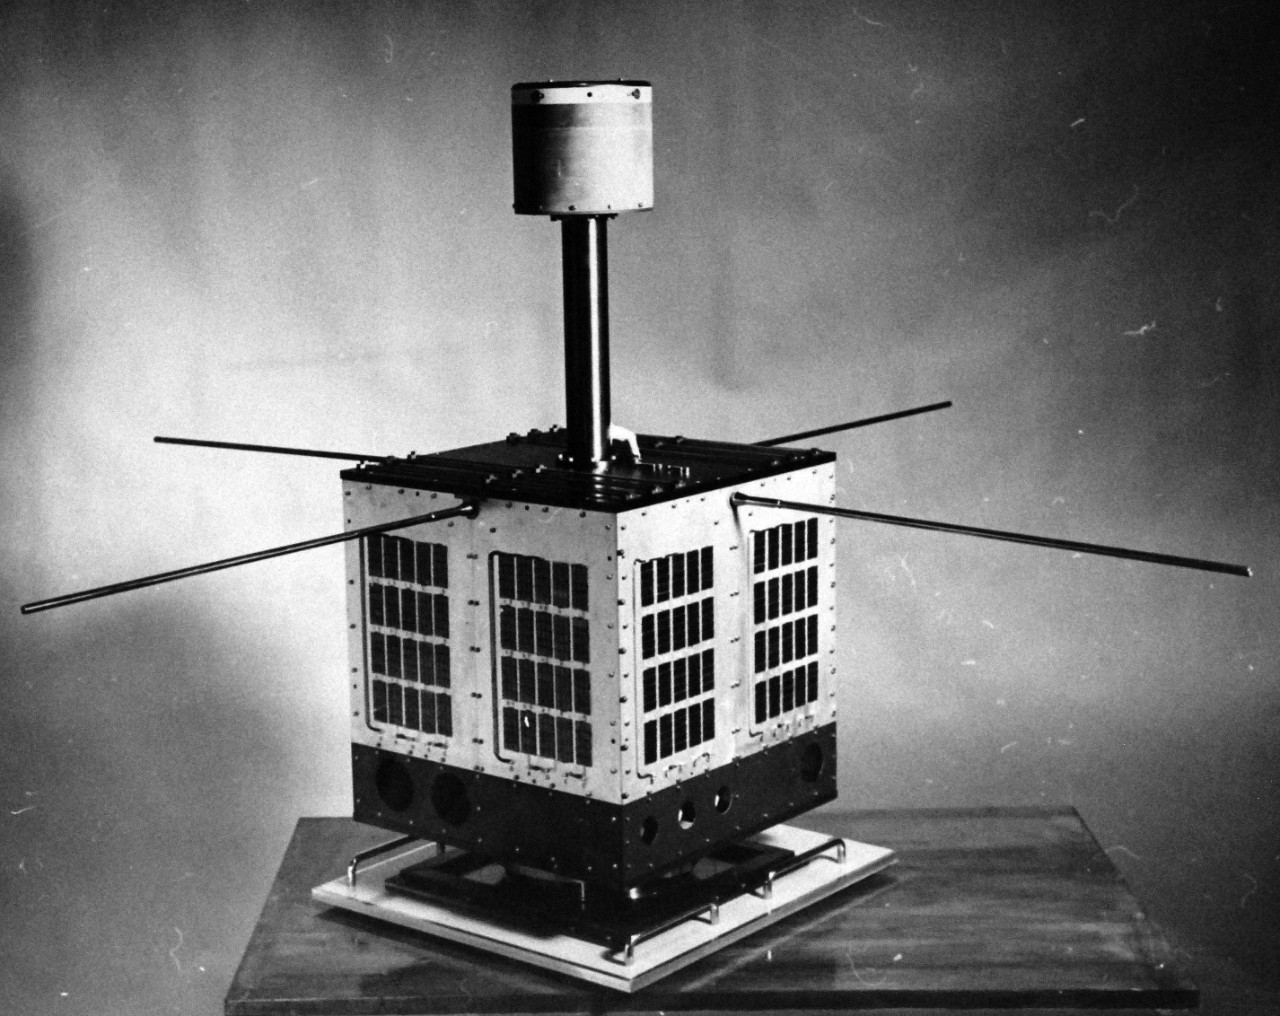 USN 711010:  The Injun II satellite.  This satellite was built by the State University of Iowa under the Office of Naval Research sponsorship, will study the relationship between alien-belt radiation and such aurora phenomena as “Northern Lights”.  It was one of five-satellites making up the Composite I payload.    Photograph released January 24, 1962.  Official U.S. Navy Photograph, now in the collections of the National Archives.  